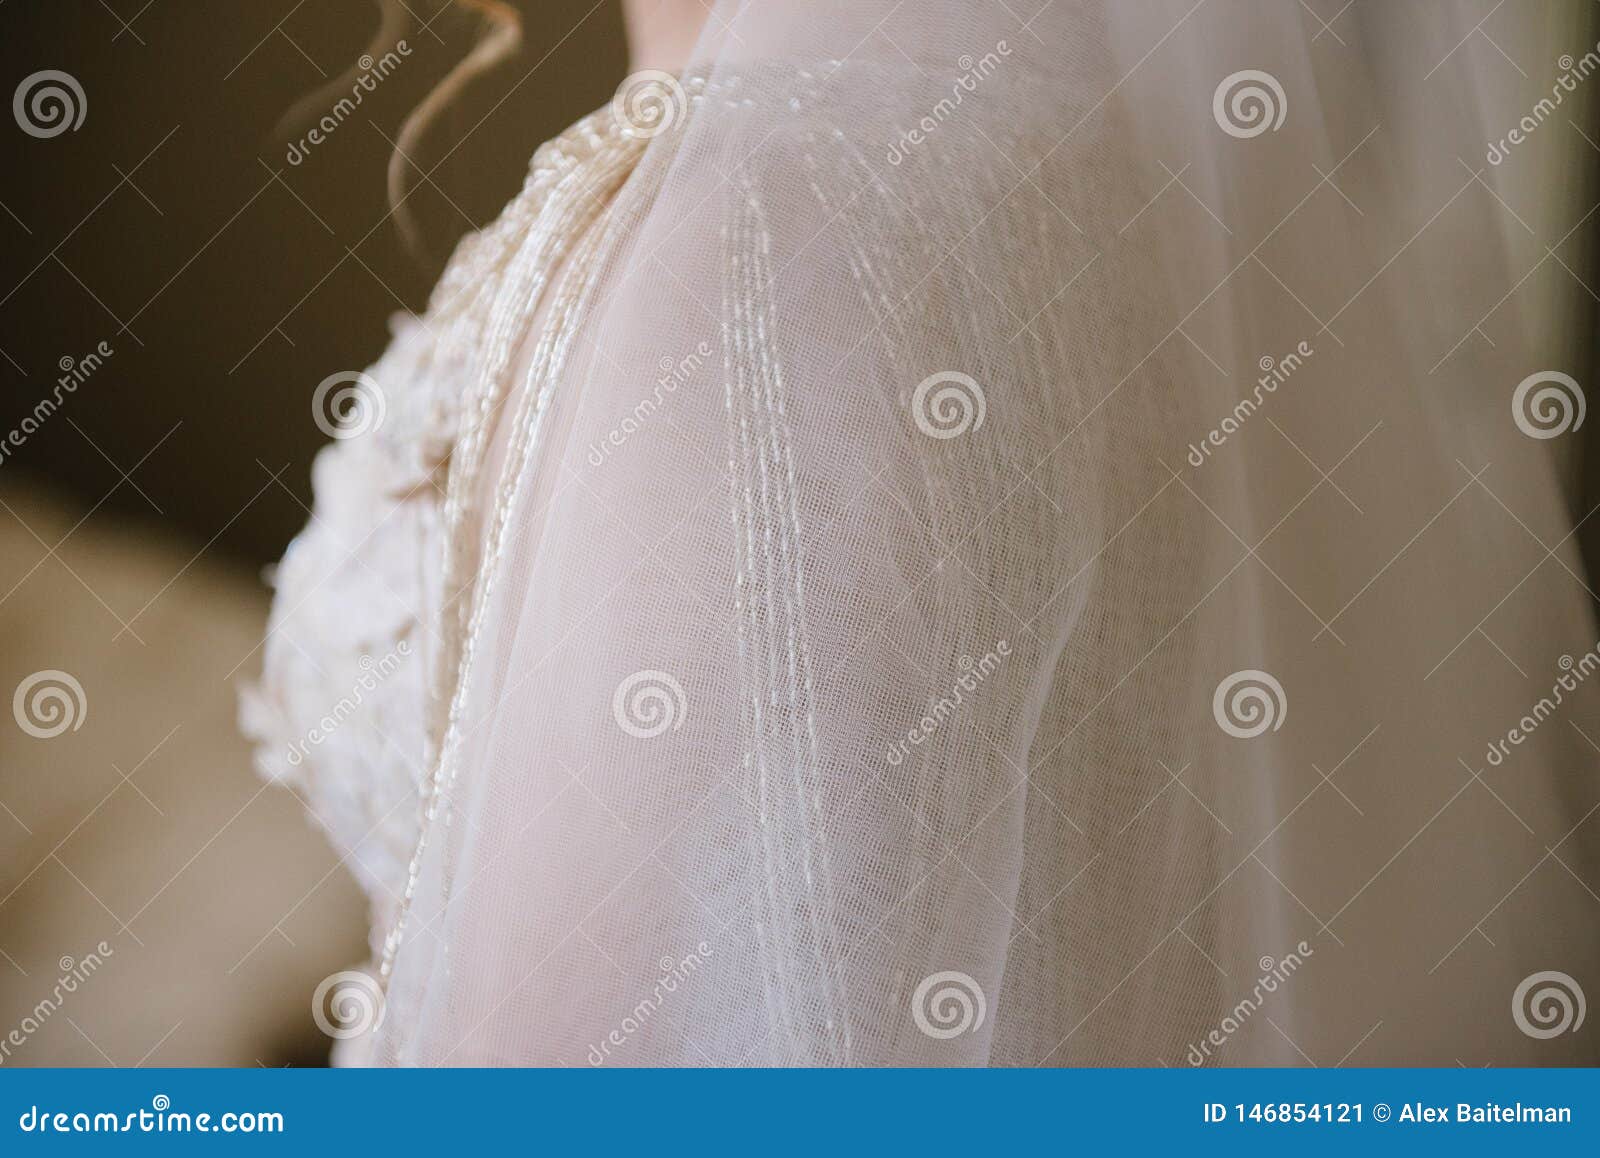 Young Woman Posing in a White Wedding Dress Close Up Stock Image ...